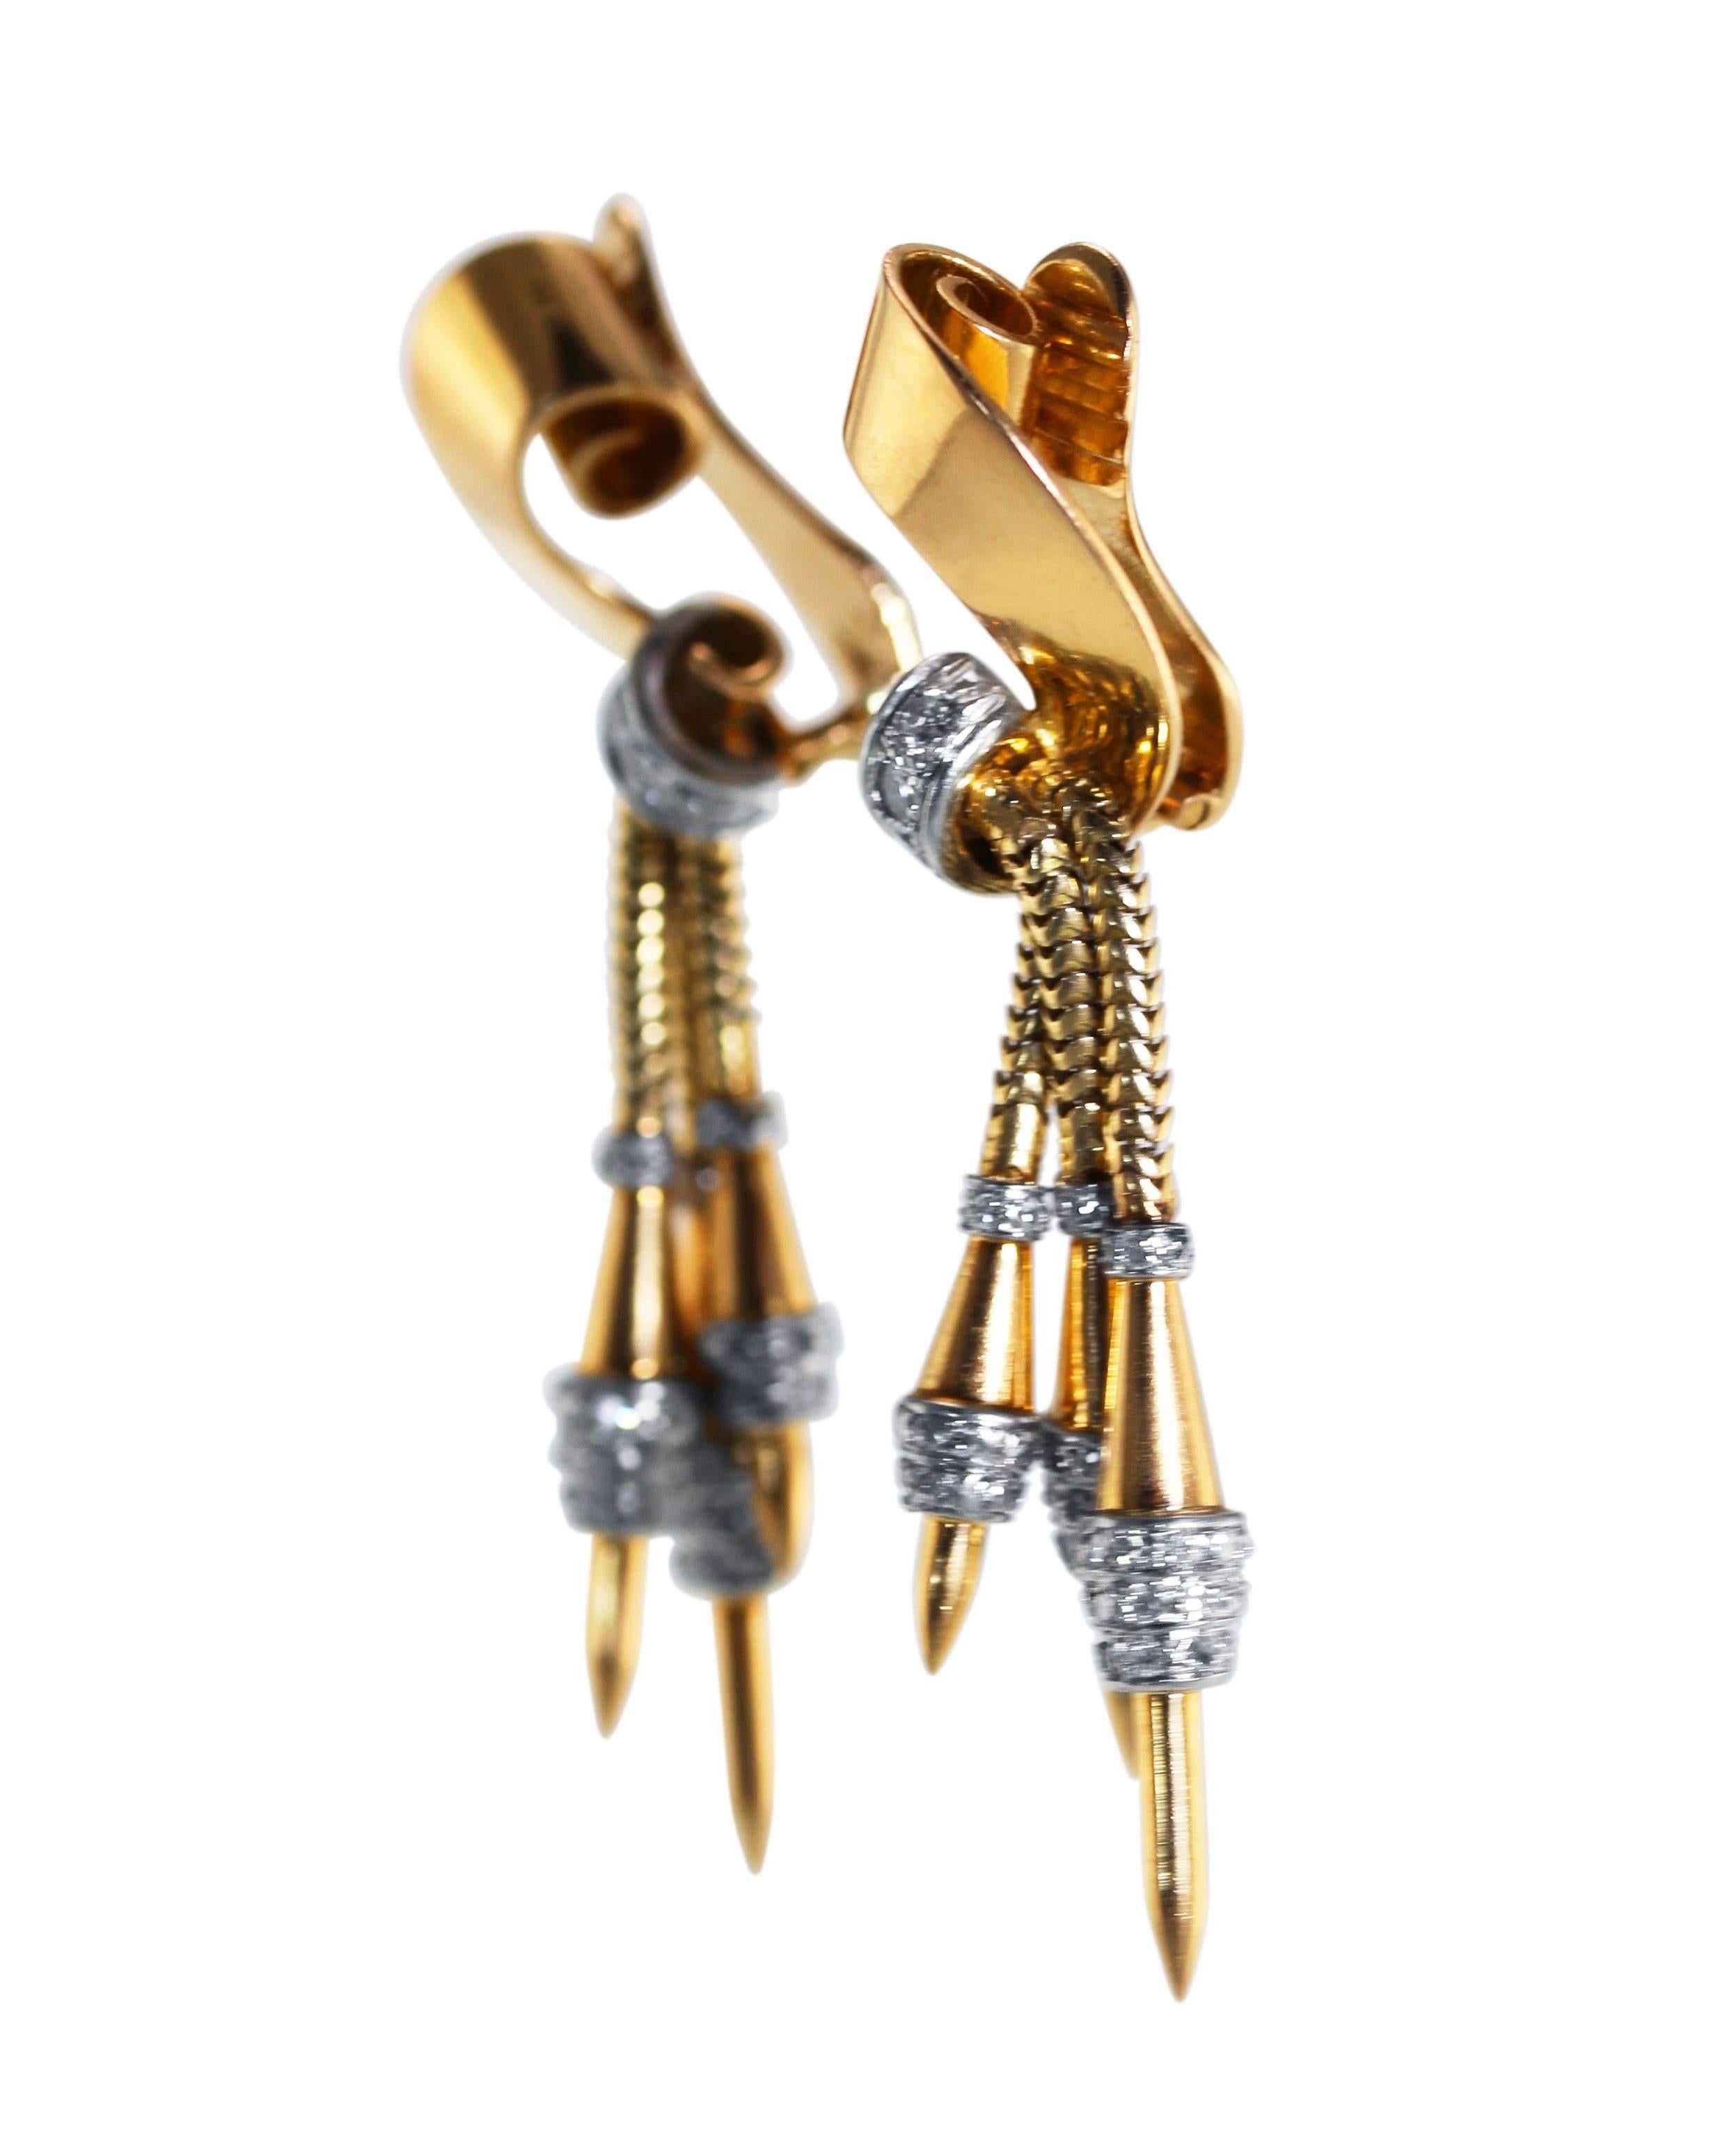 Pair of Retro 18 Karat Gold, Platinum and Diamond Earclips
• 176 round diamonds weighing approximately 1.25 carats
• Measuring 2 1/8 by 1/2 inches, gross weight 19.6 grams